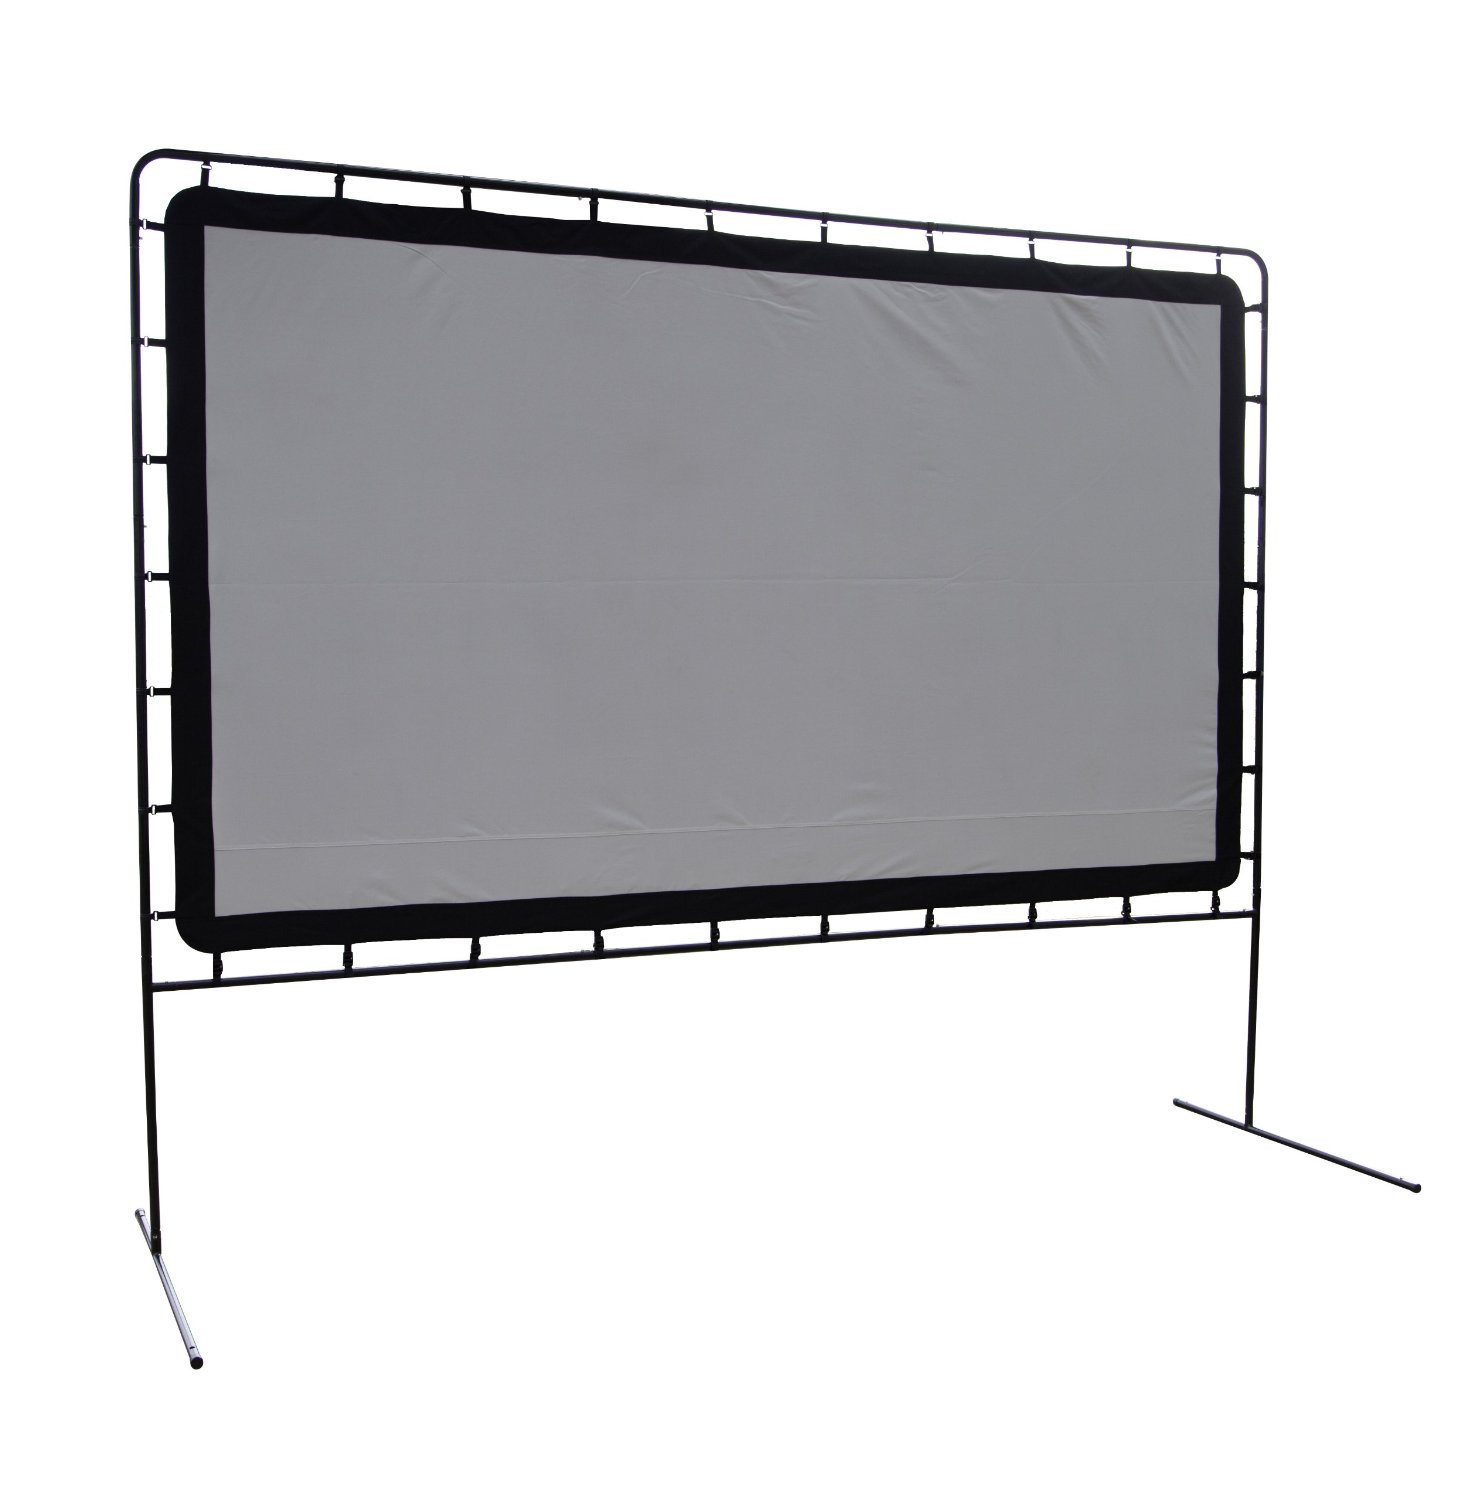 where-can-i-rent-a-projection-screen